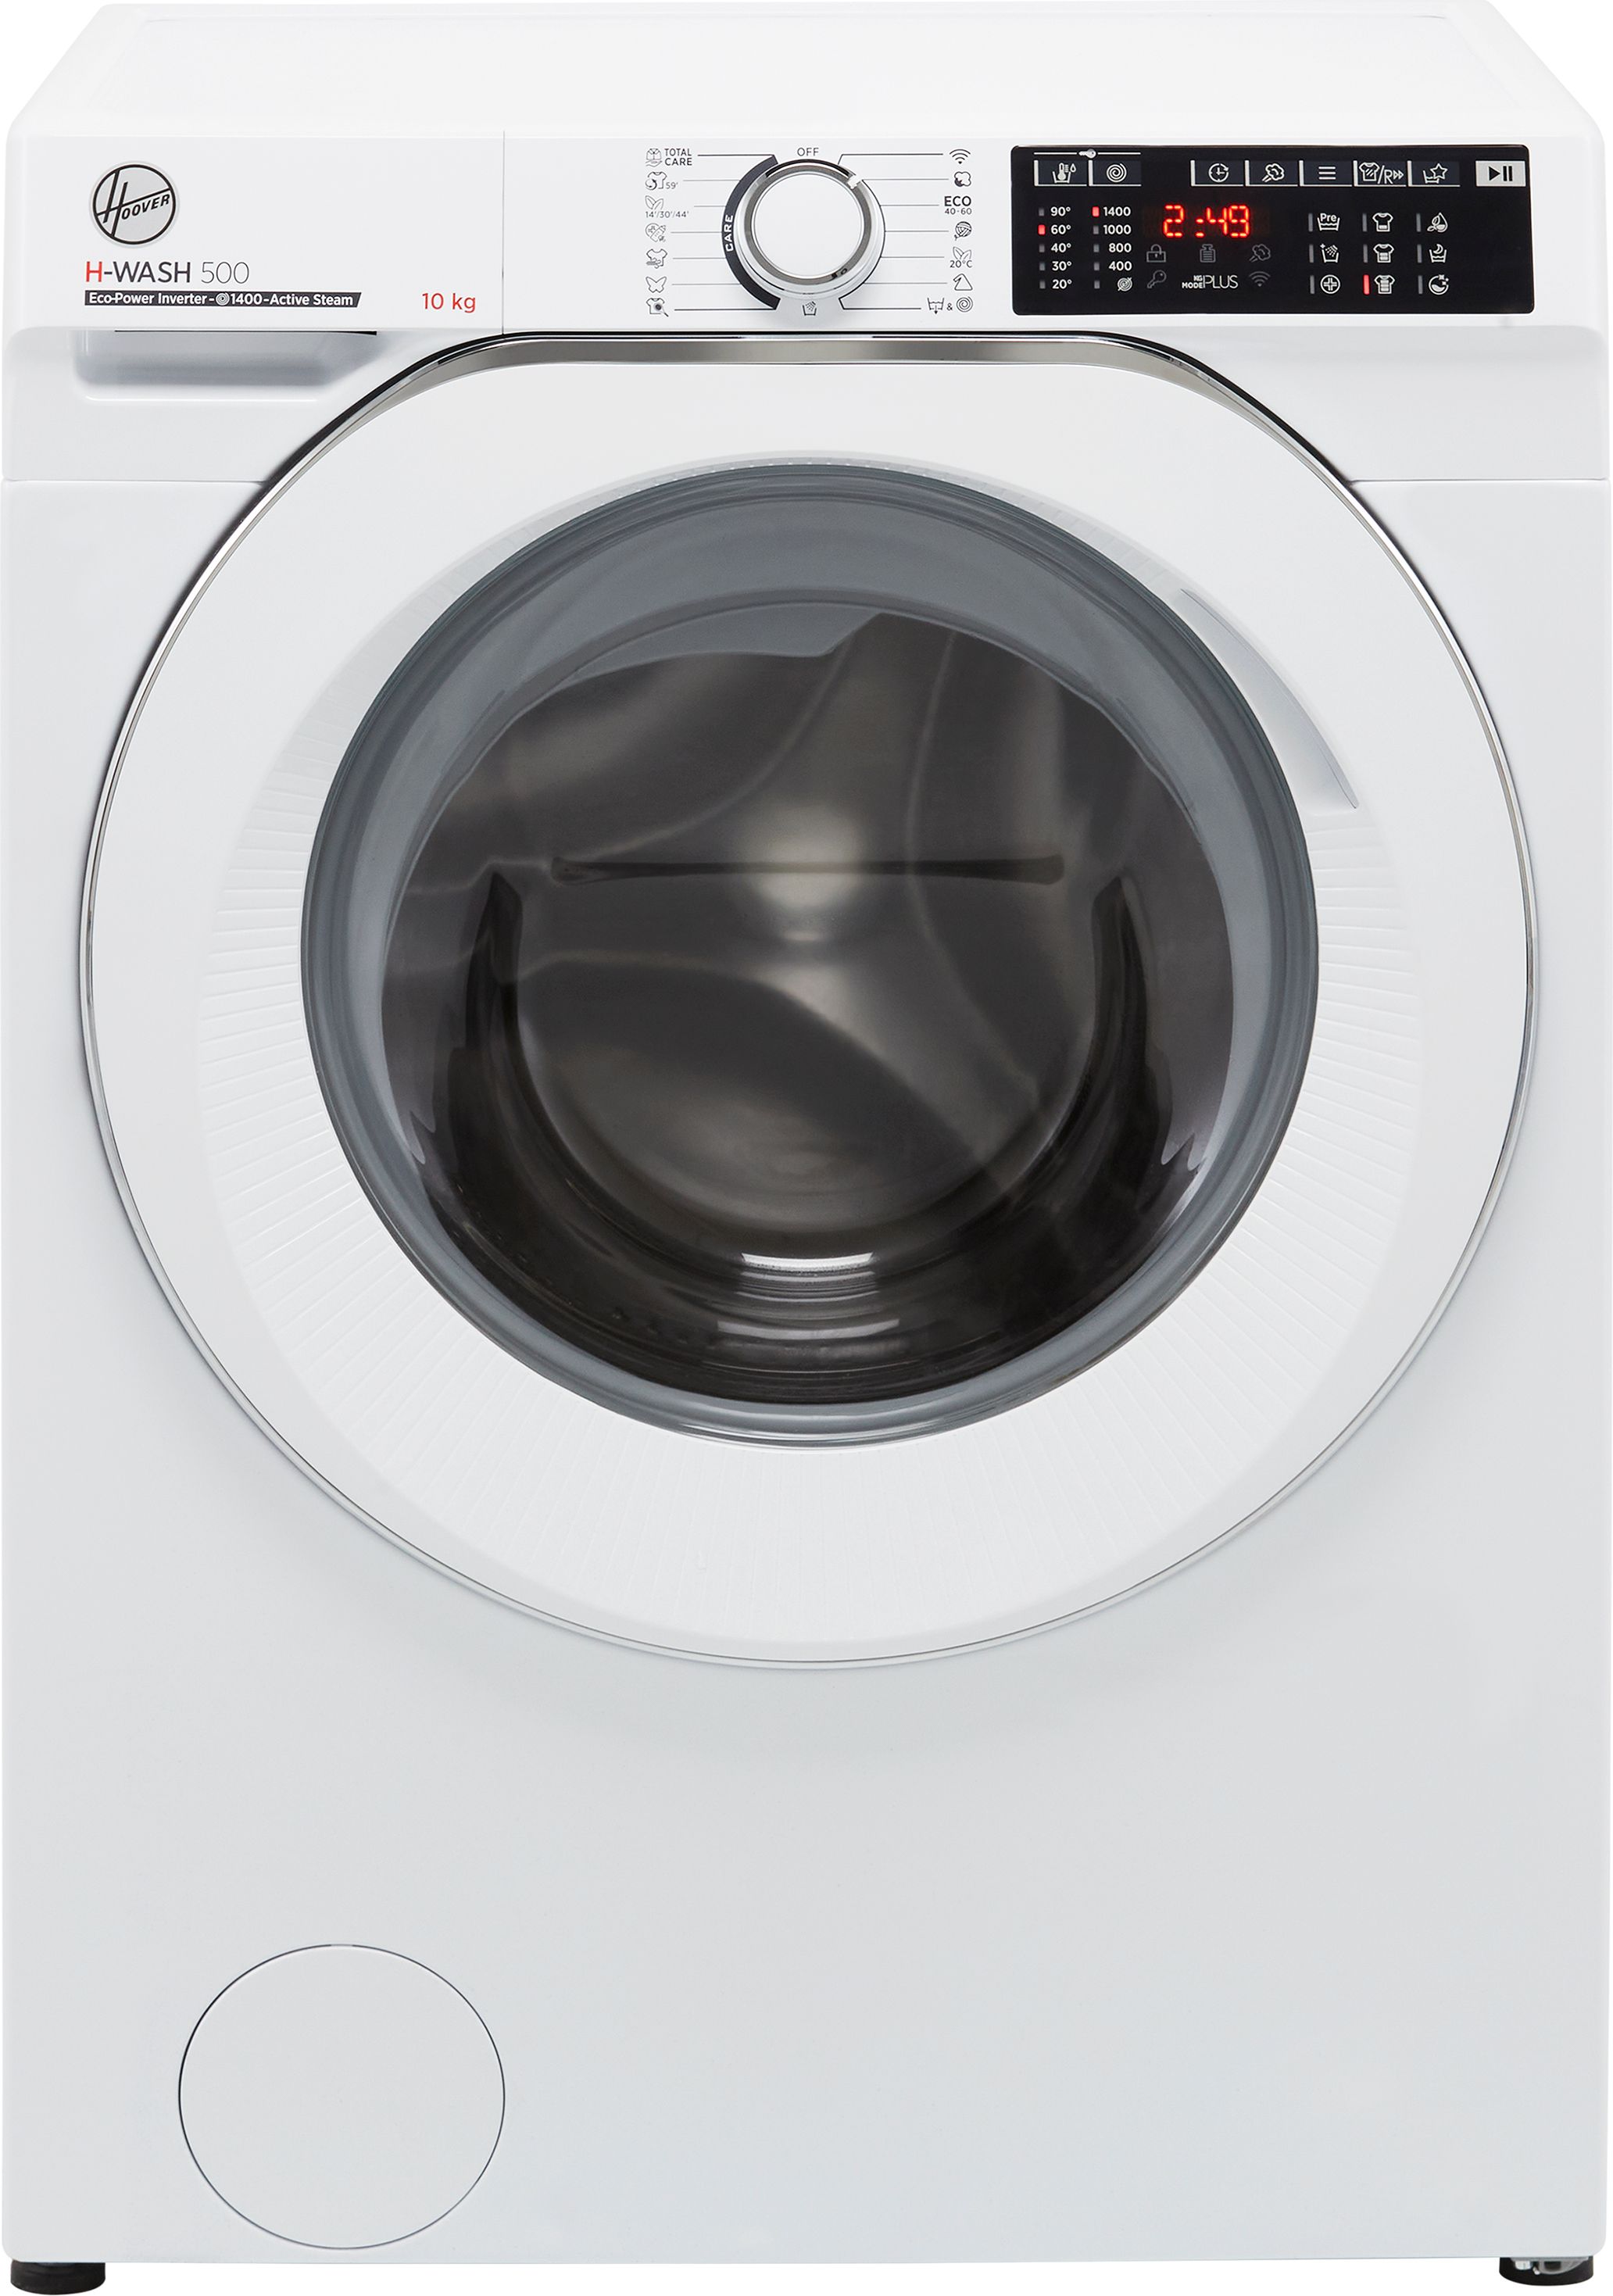 Hoover H-WASH 500 HW410AMC/1 10kg Washing Machine with 1400 rpm - White - A Rated, White